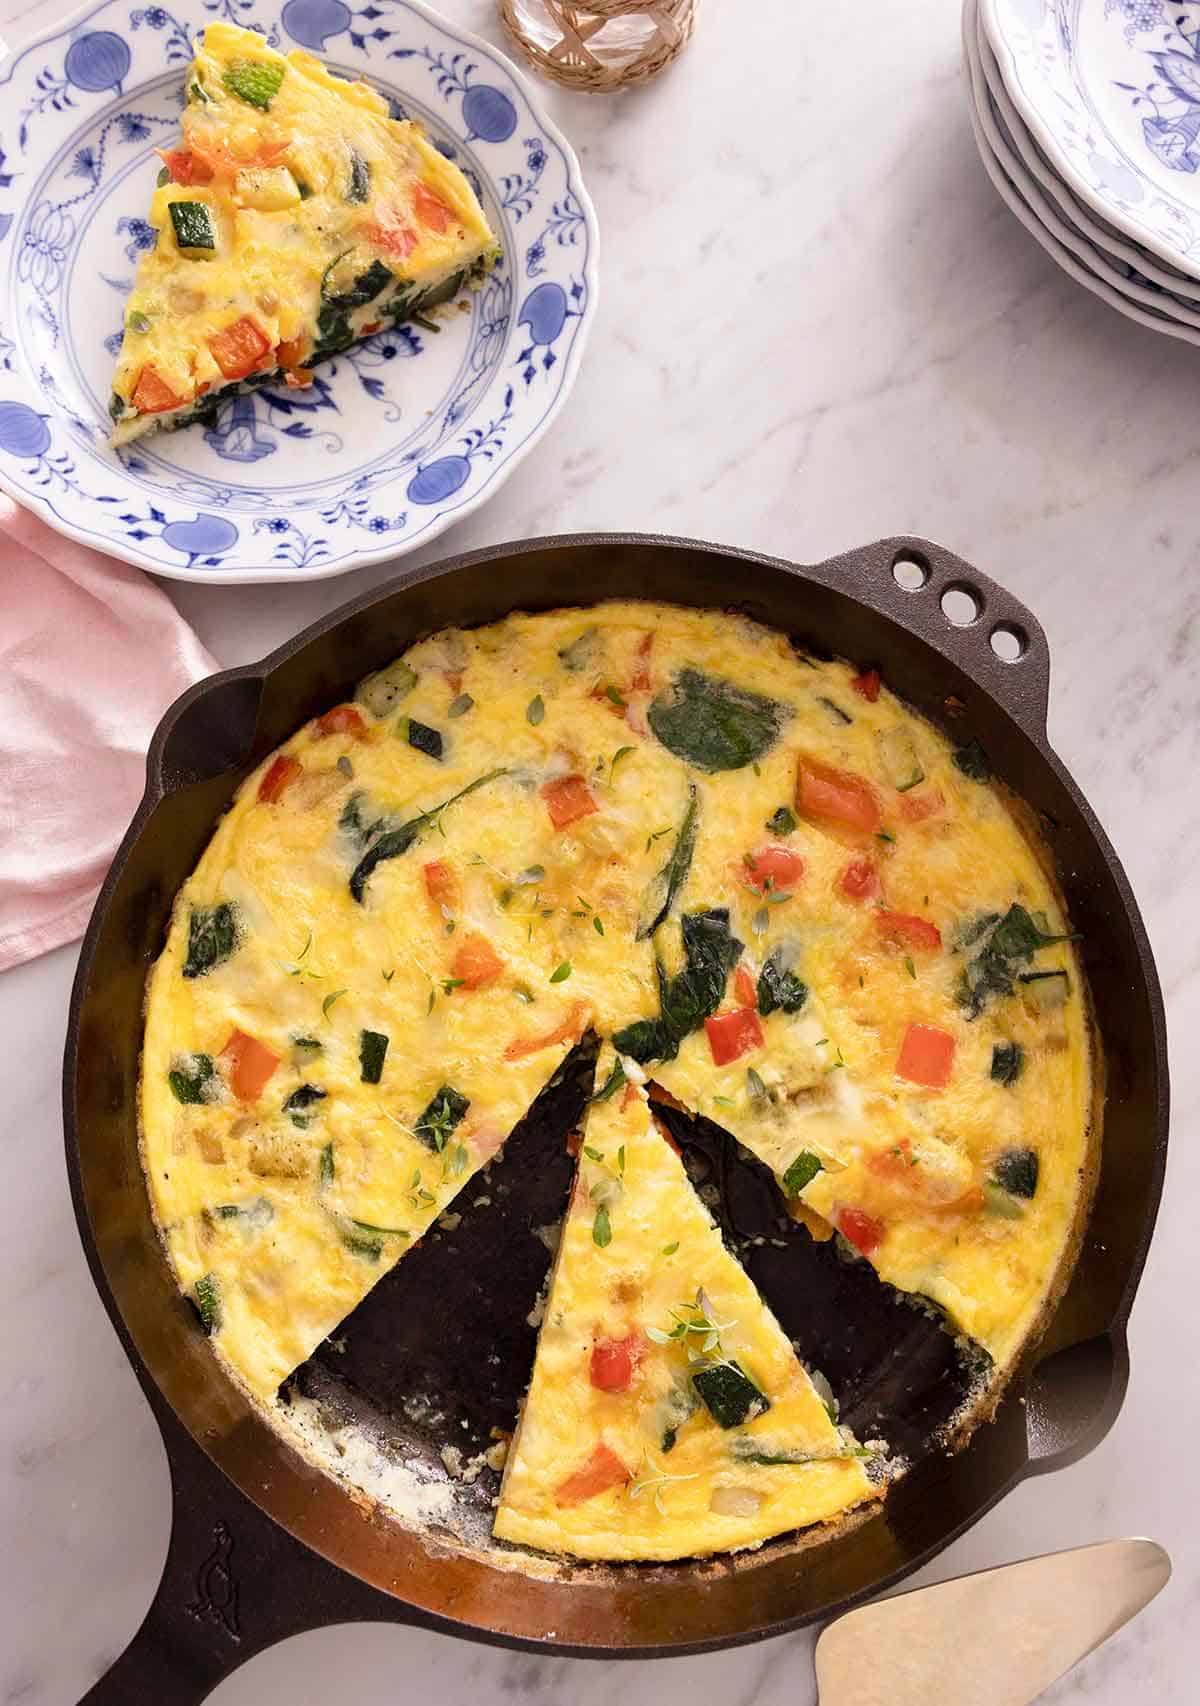 Overhead view of a pan with a frittata, cut, with a slice in a plate beside the pan.